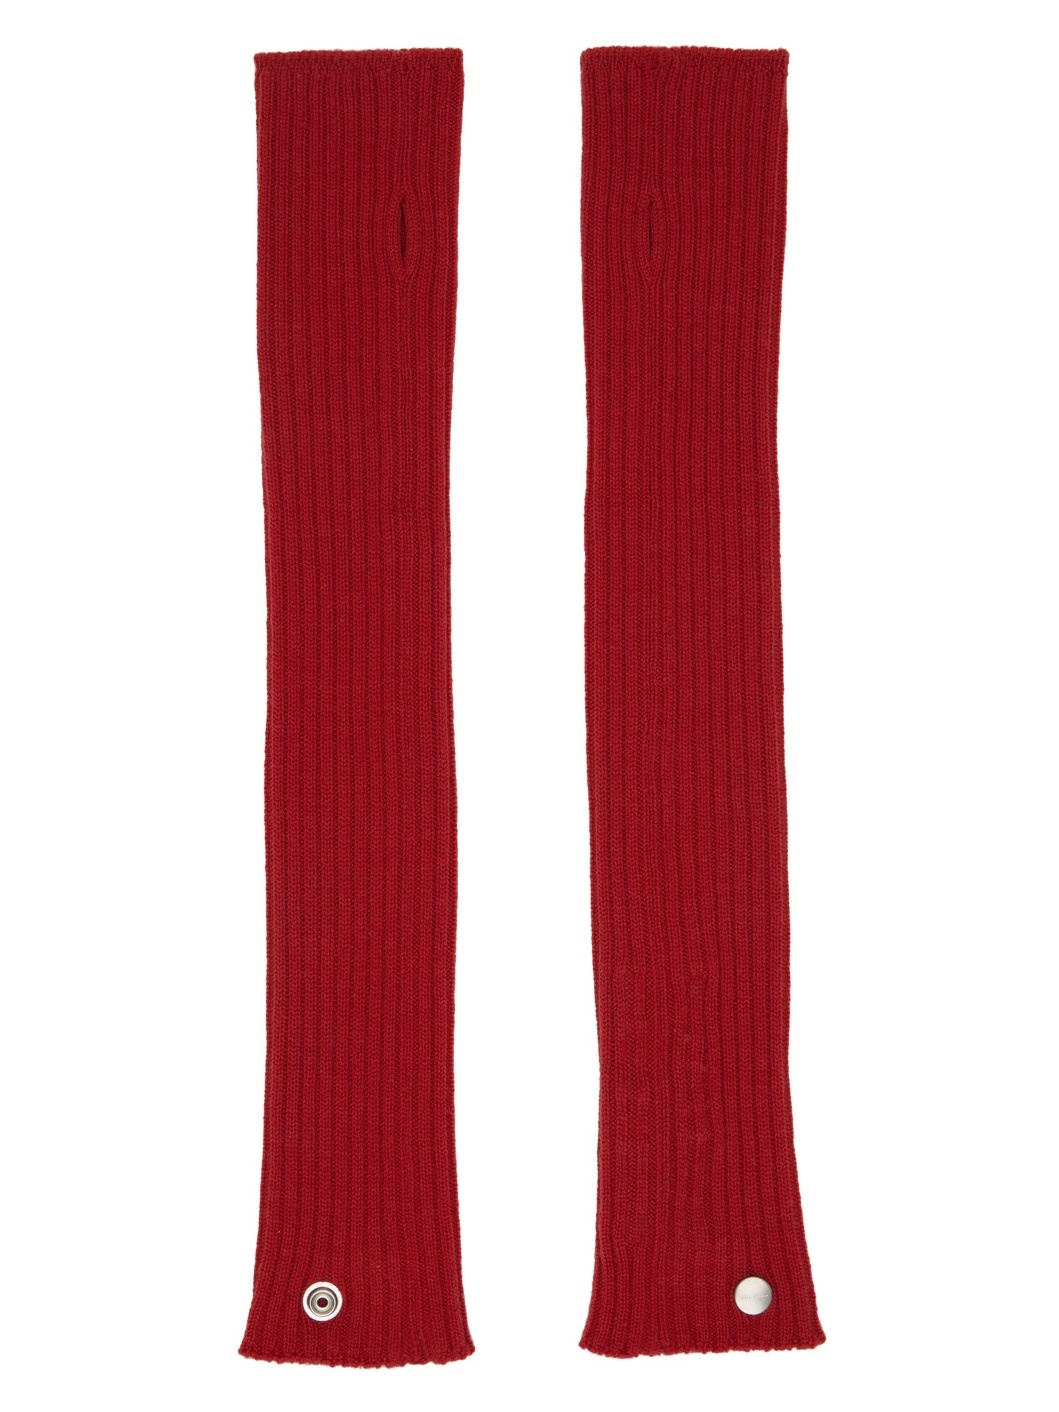 Red Rasato Knit Arm Warmers - 2